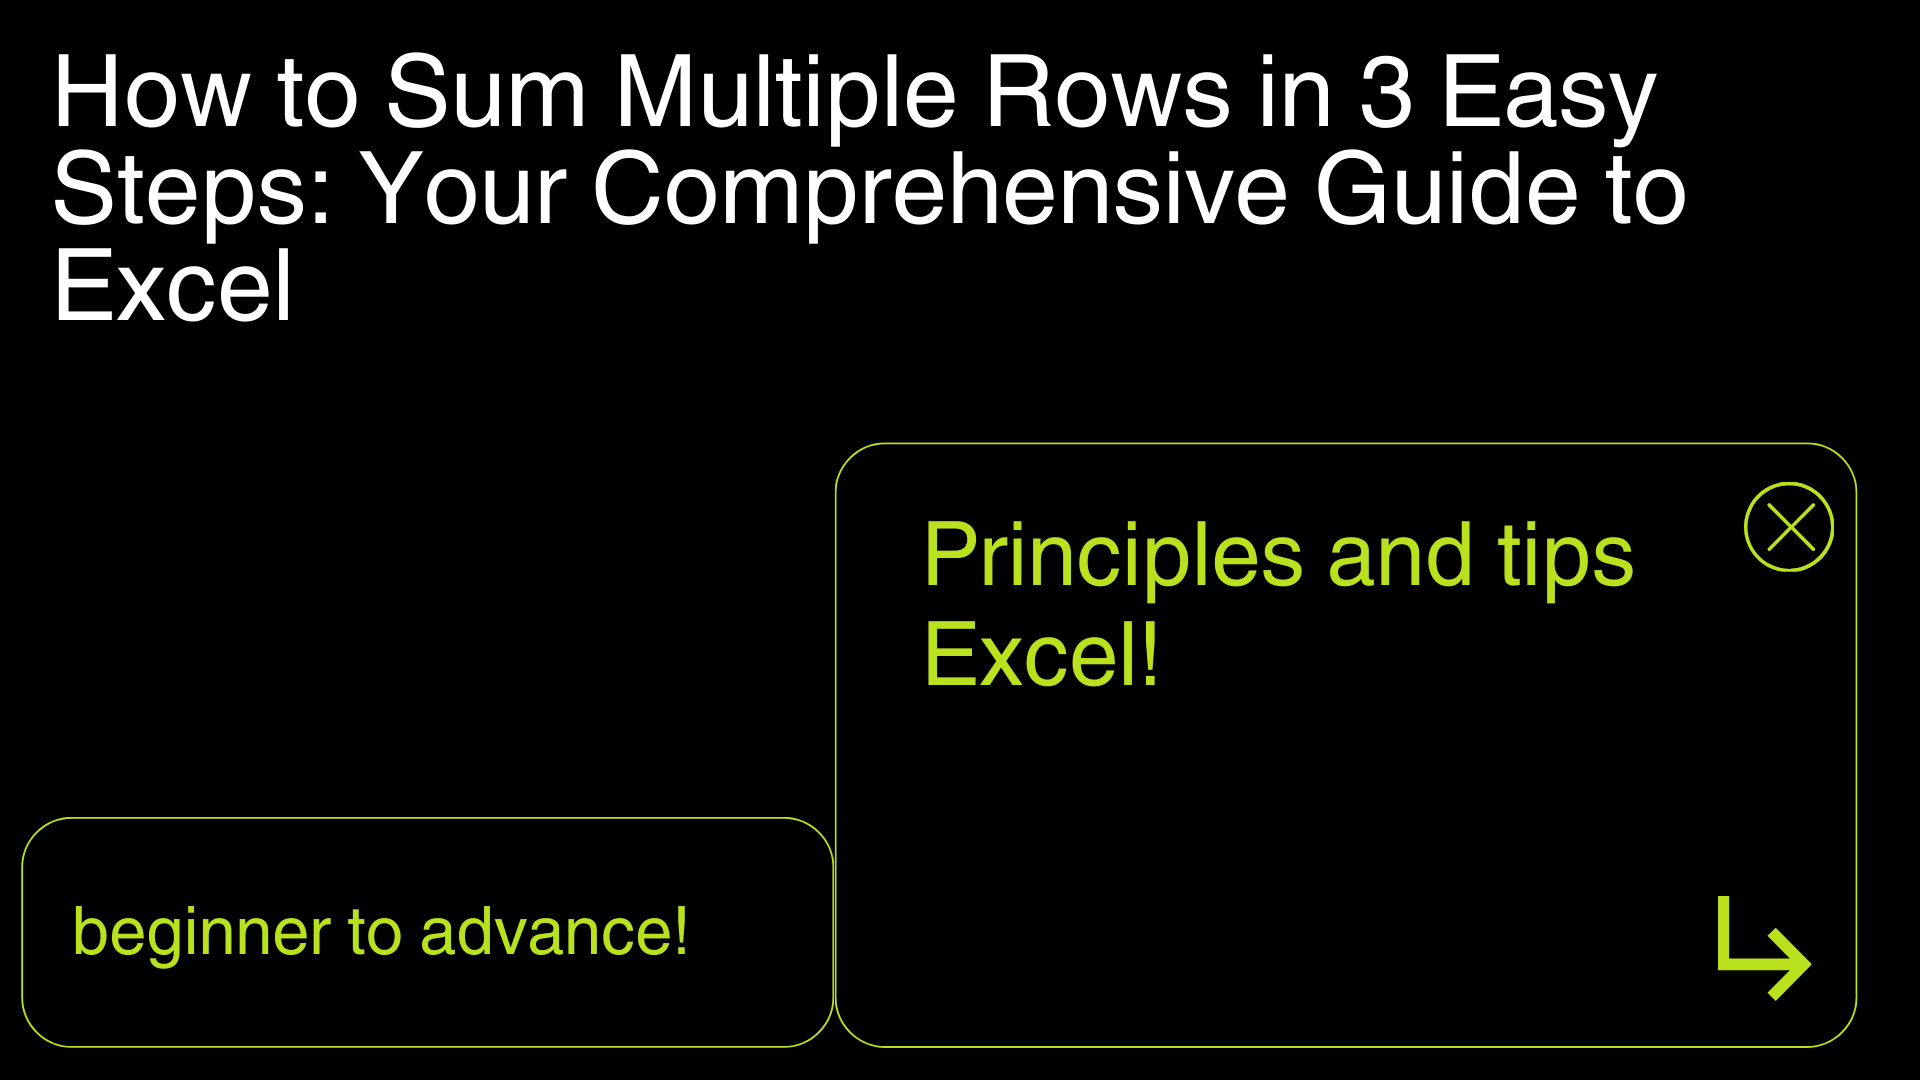 How to Sum Multiple Rows in 3 Easy Steps: Your Comprehensive Guide to Excel